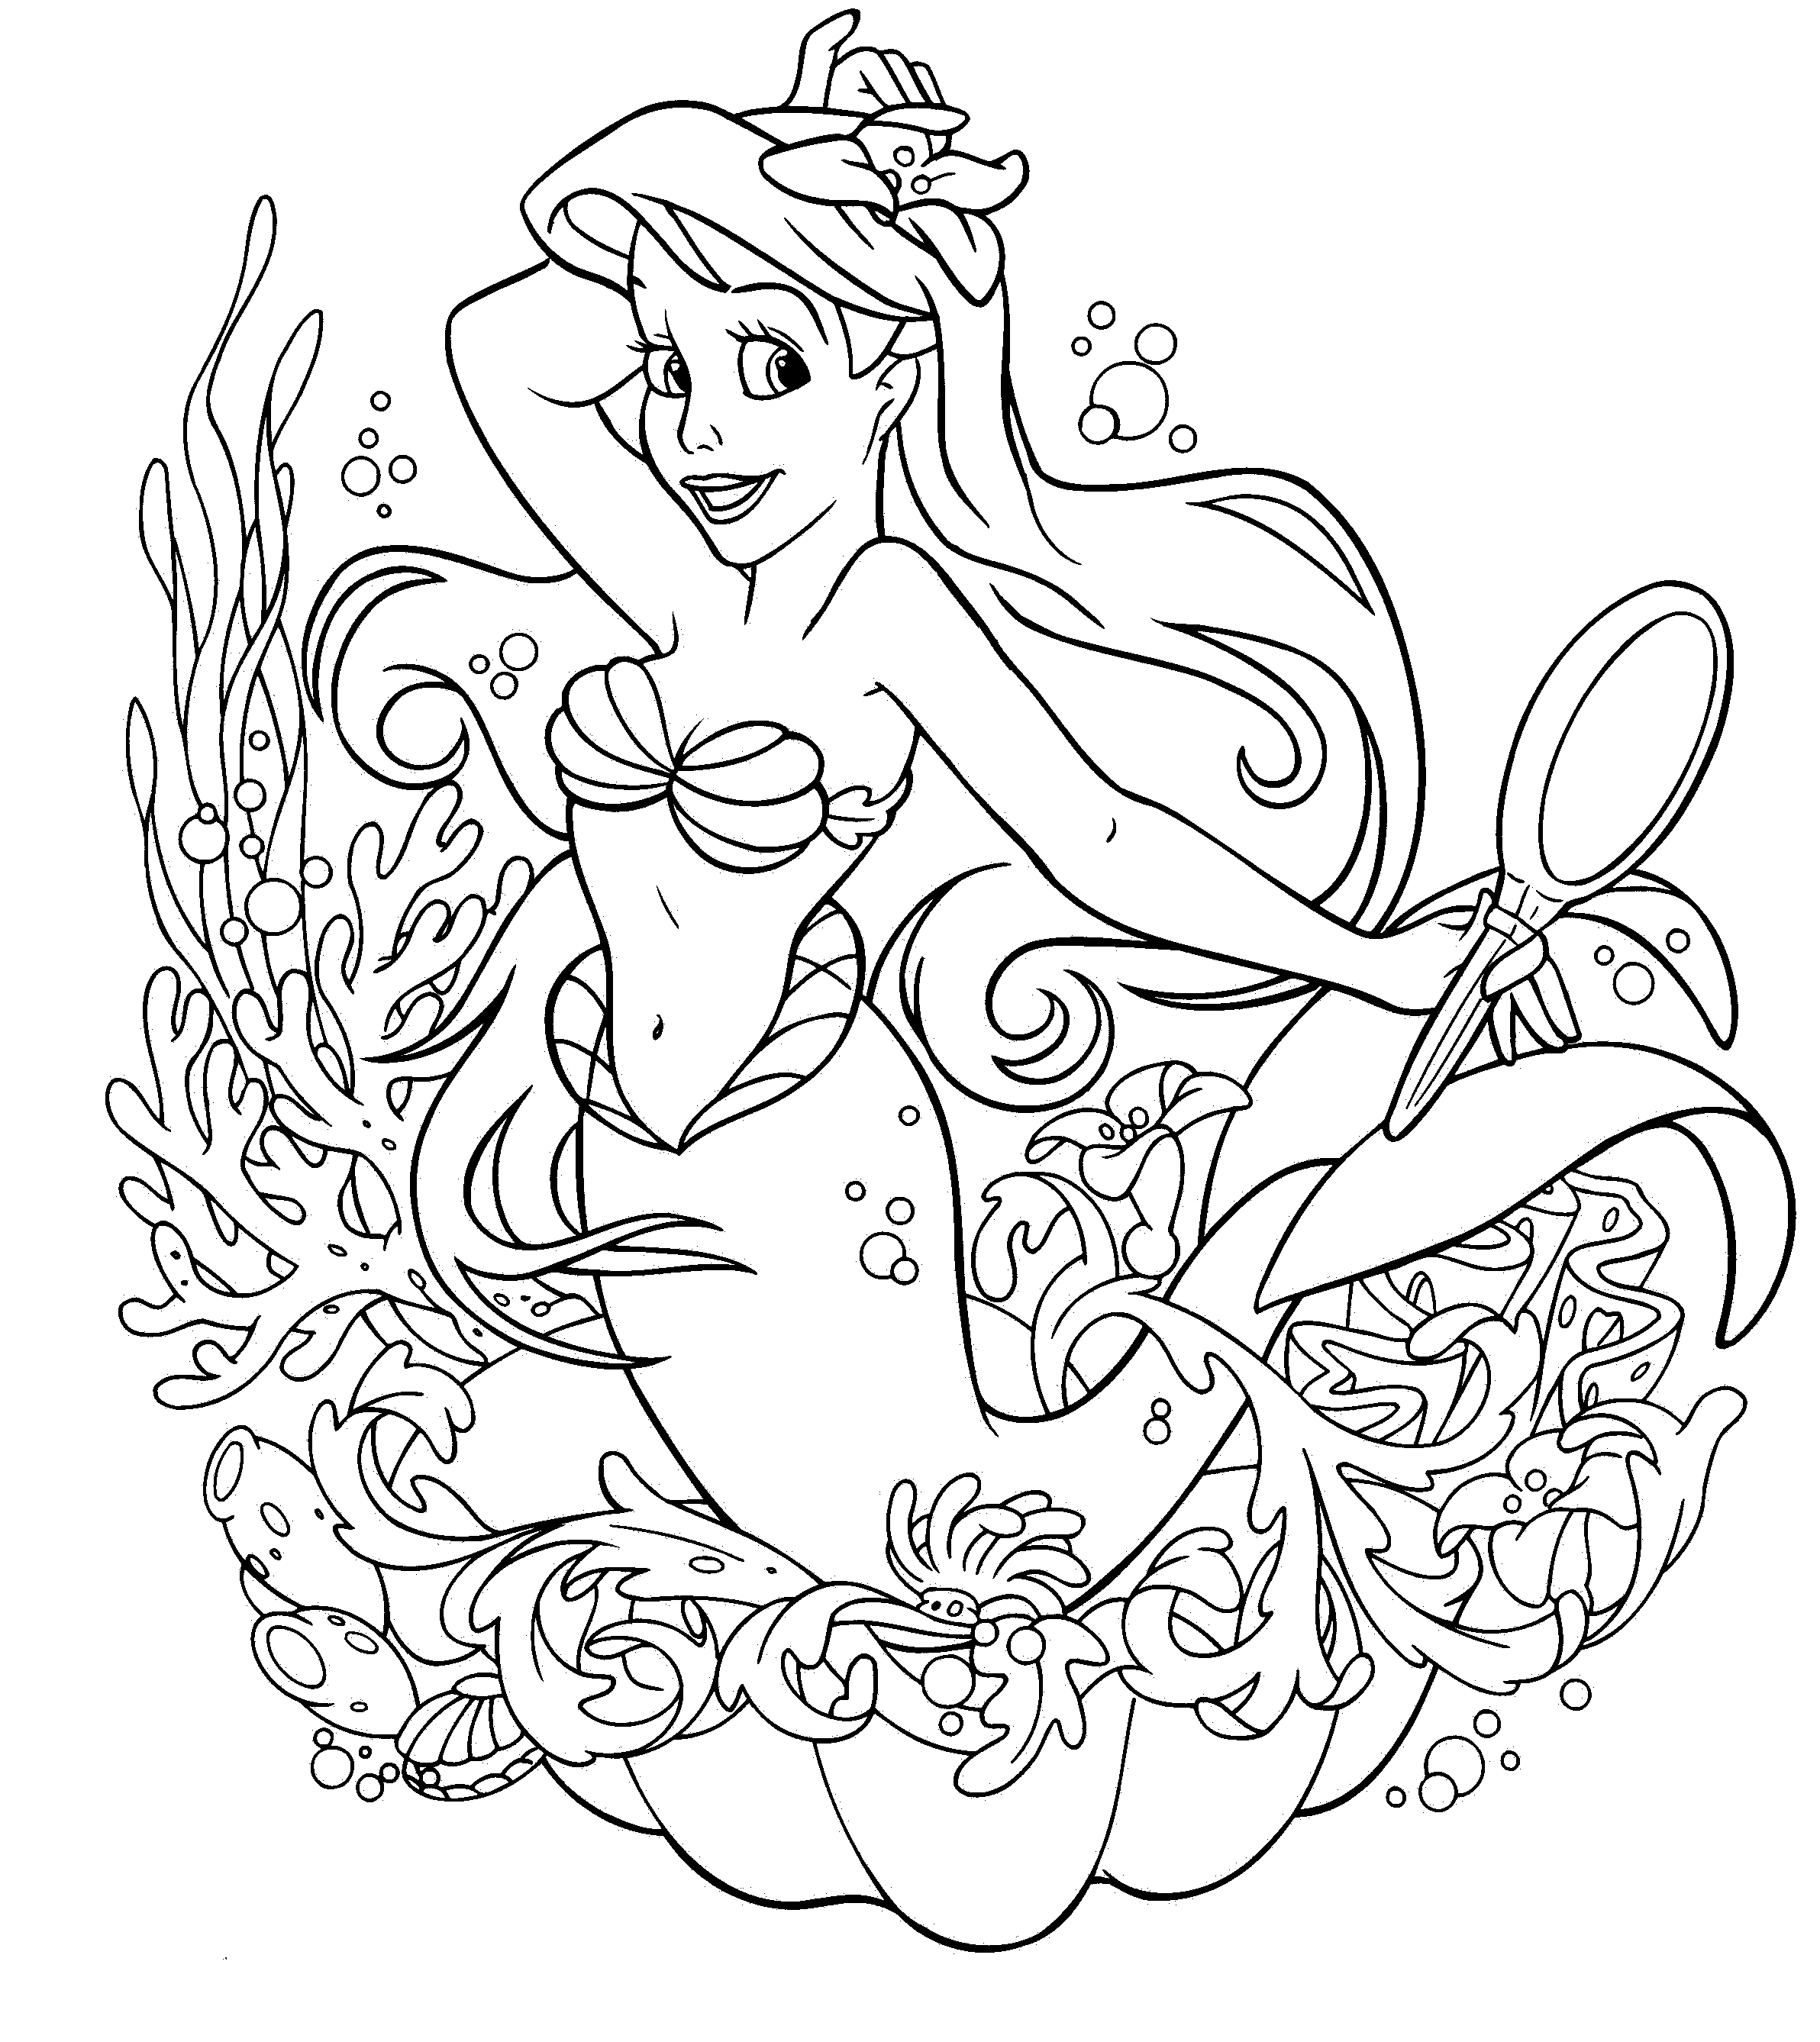 Disney princess coloring pages to print to download and